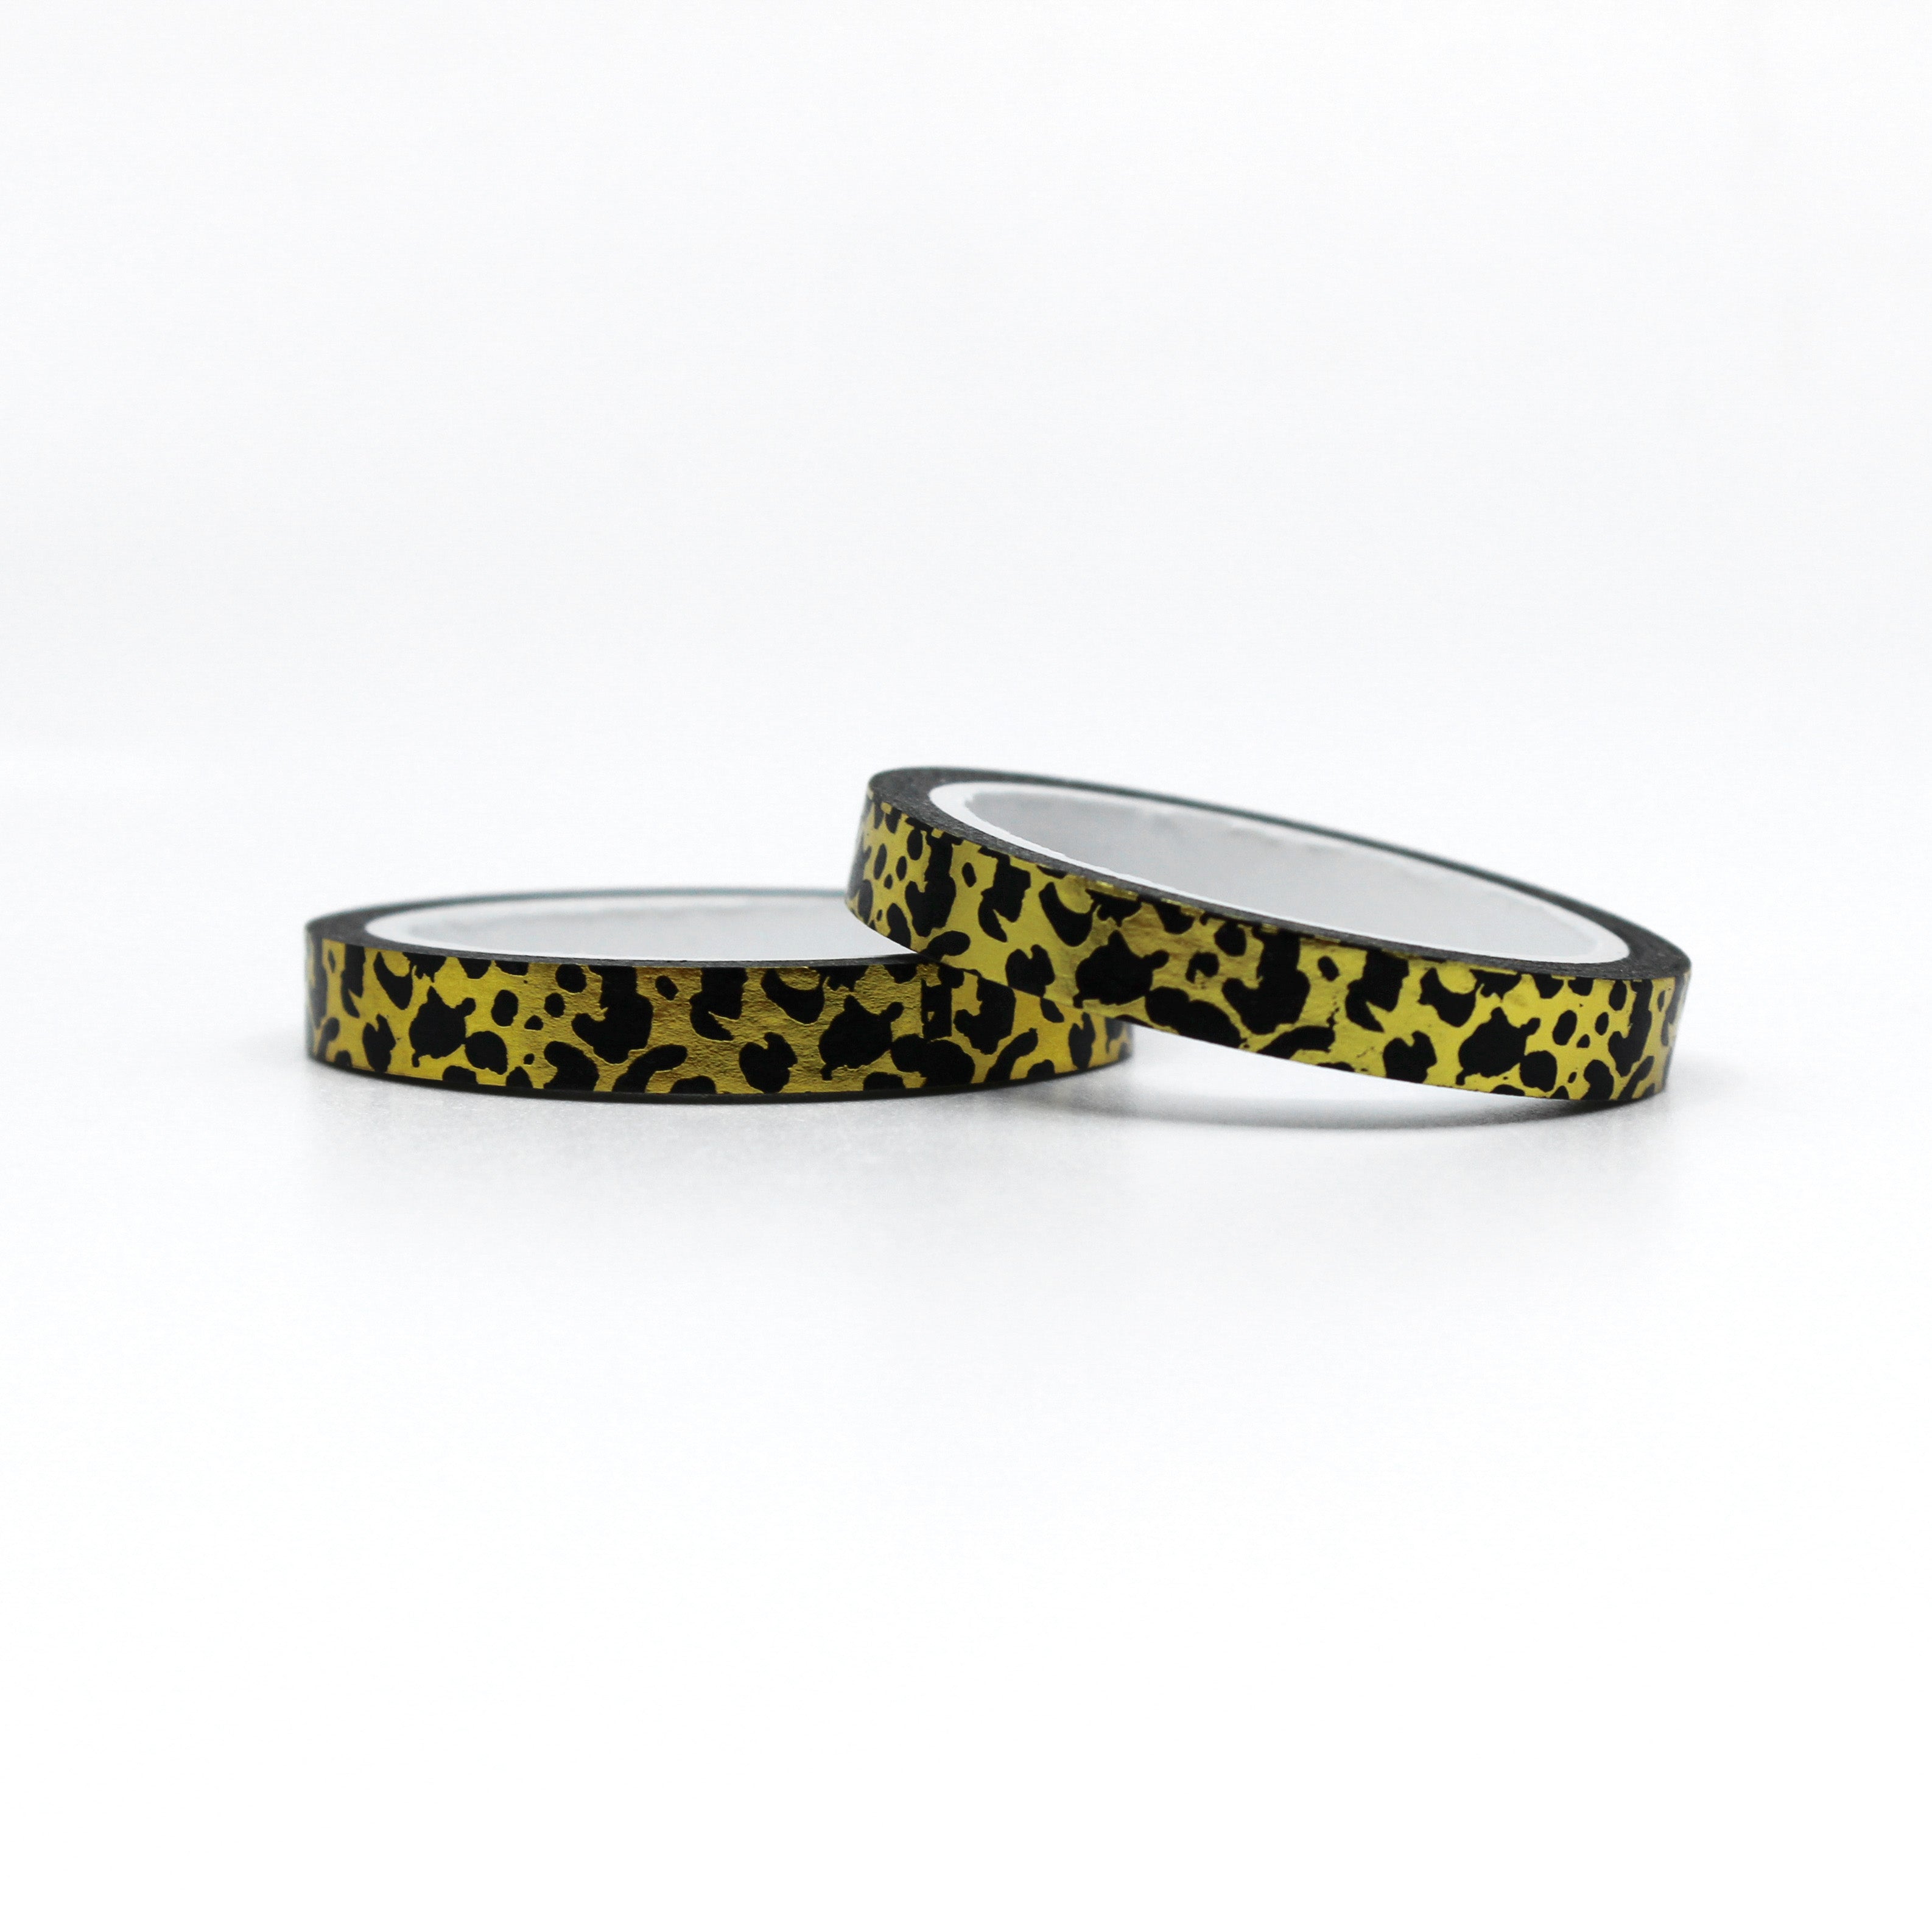 Elevate your crafts with our gold foil narrow leopard print washi tape, featuring a sleek and luxurious leopard print design accented with shimmering gold foil, perfect for adding a touch of wild elegance to your projects. This tape is sold at BBB Supplies Craft Shop.